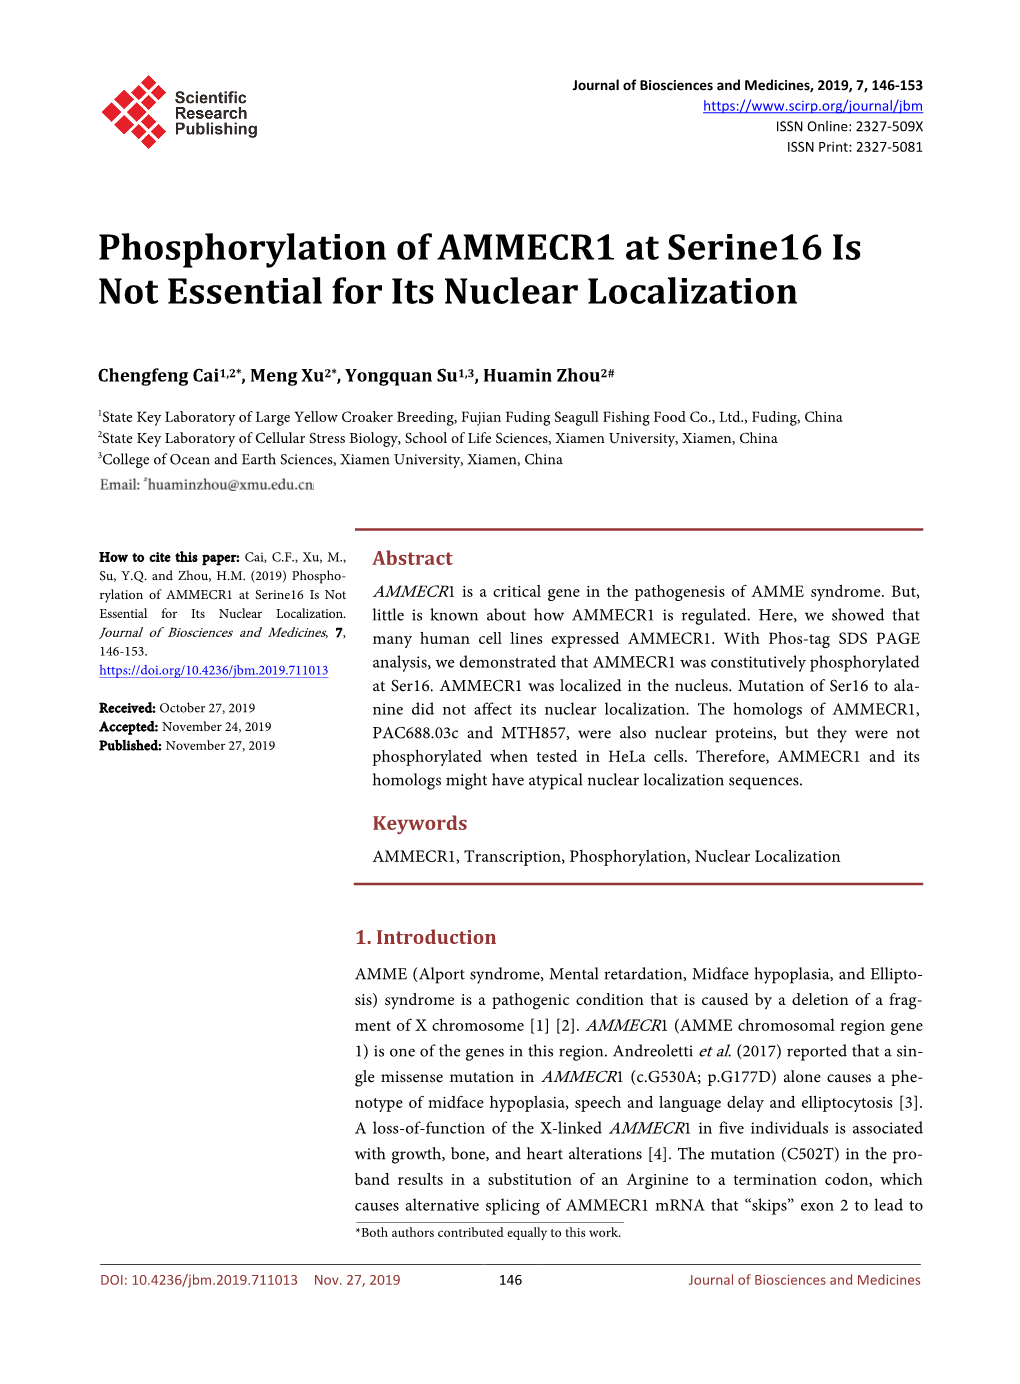 Phosphorylation of AMMECR1 at Serine16 Is Not Essential for Its Nuclear Localization